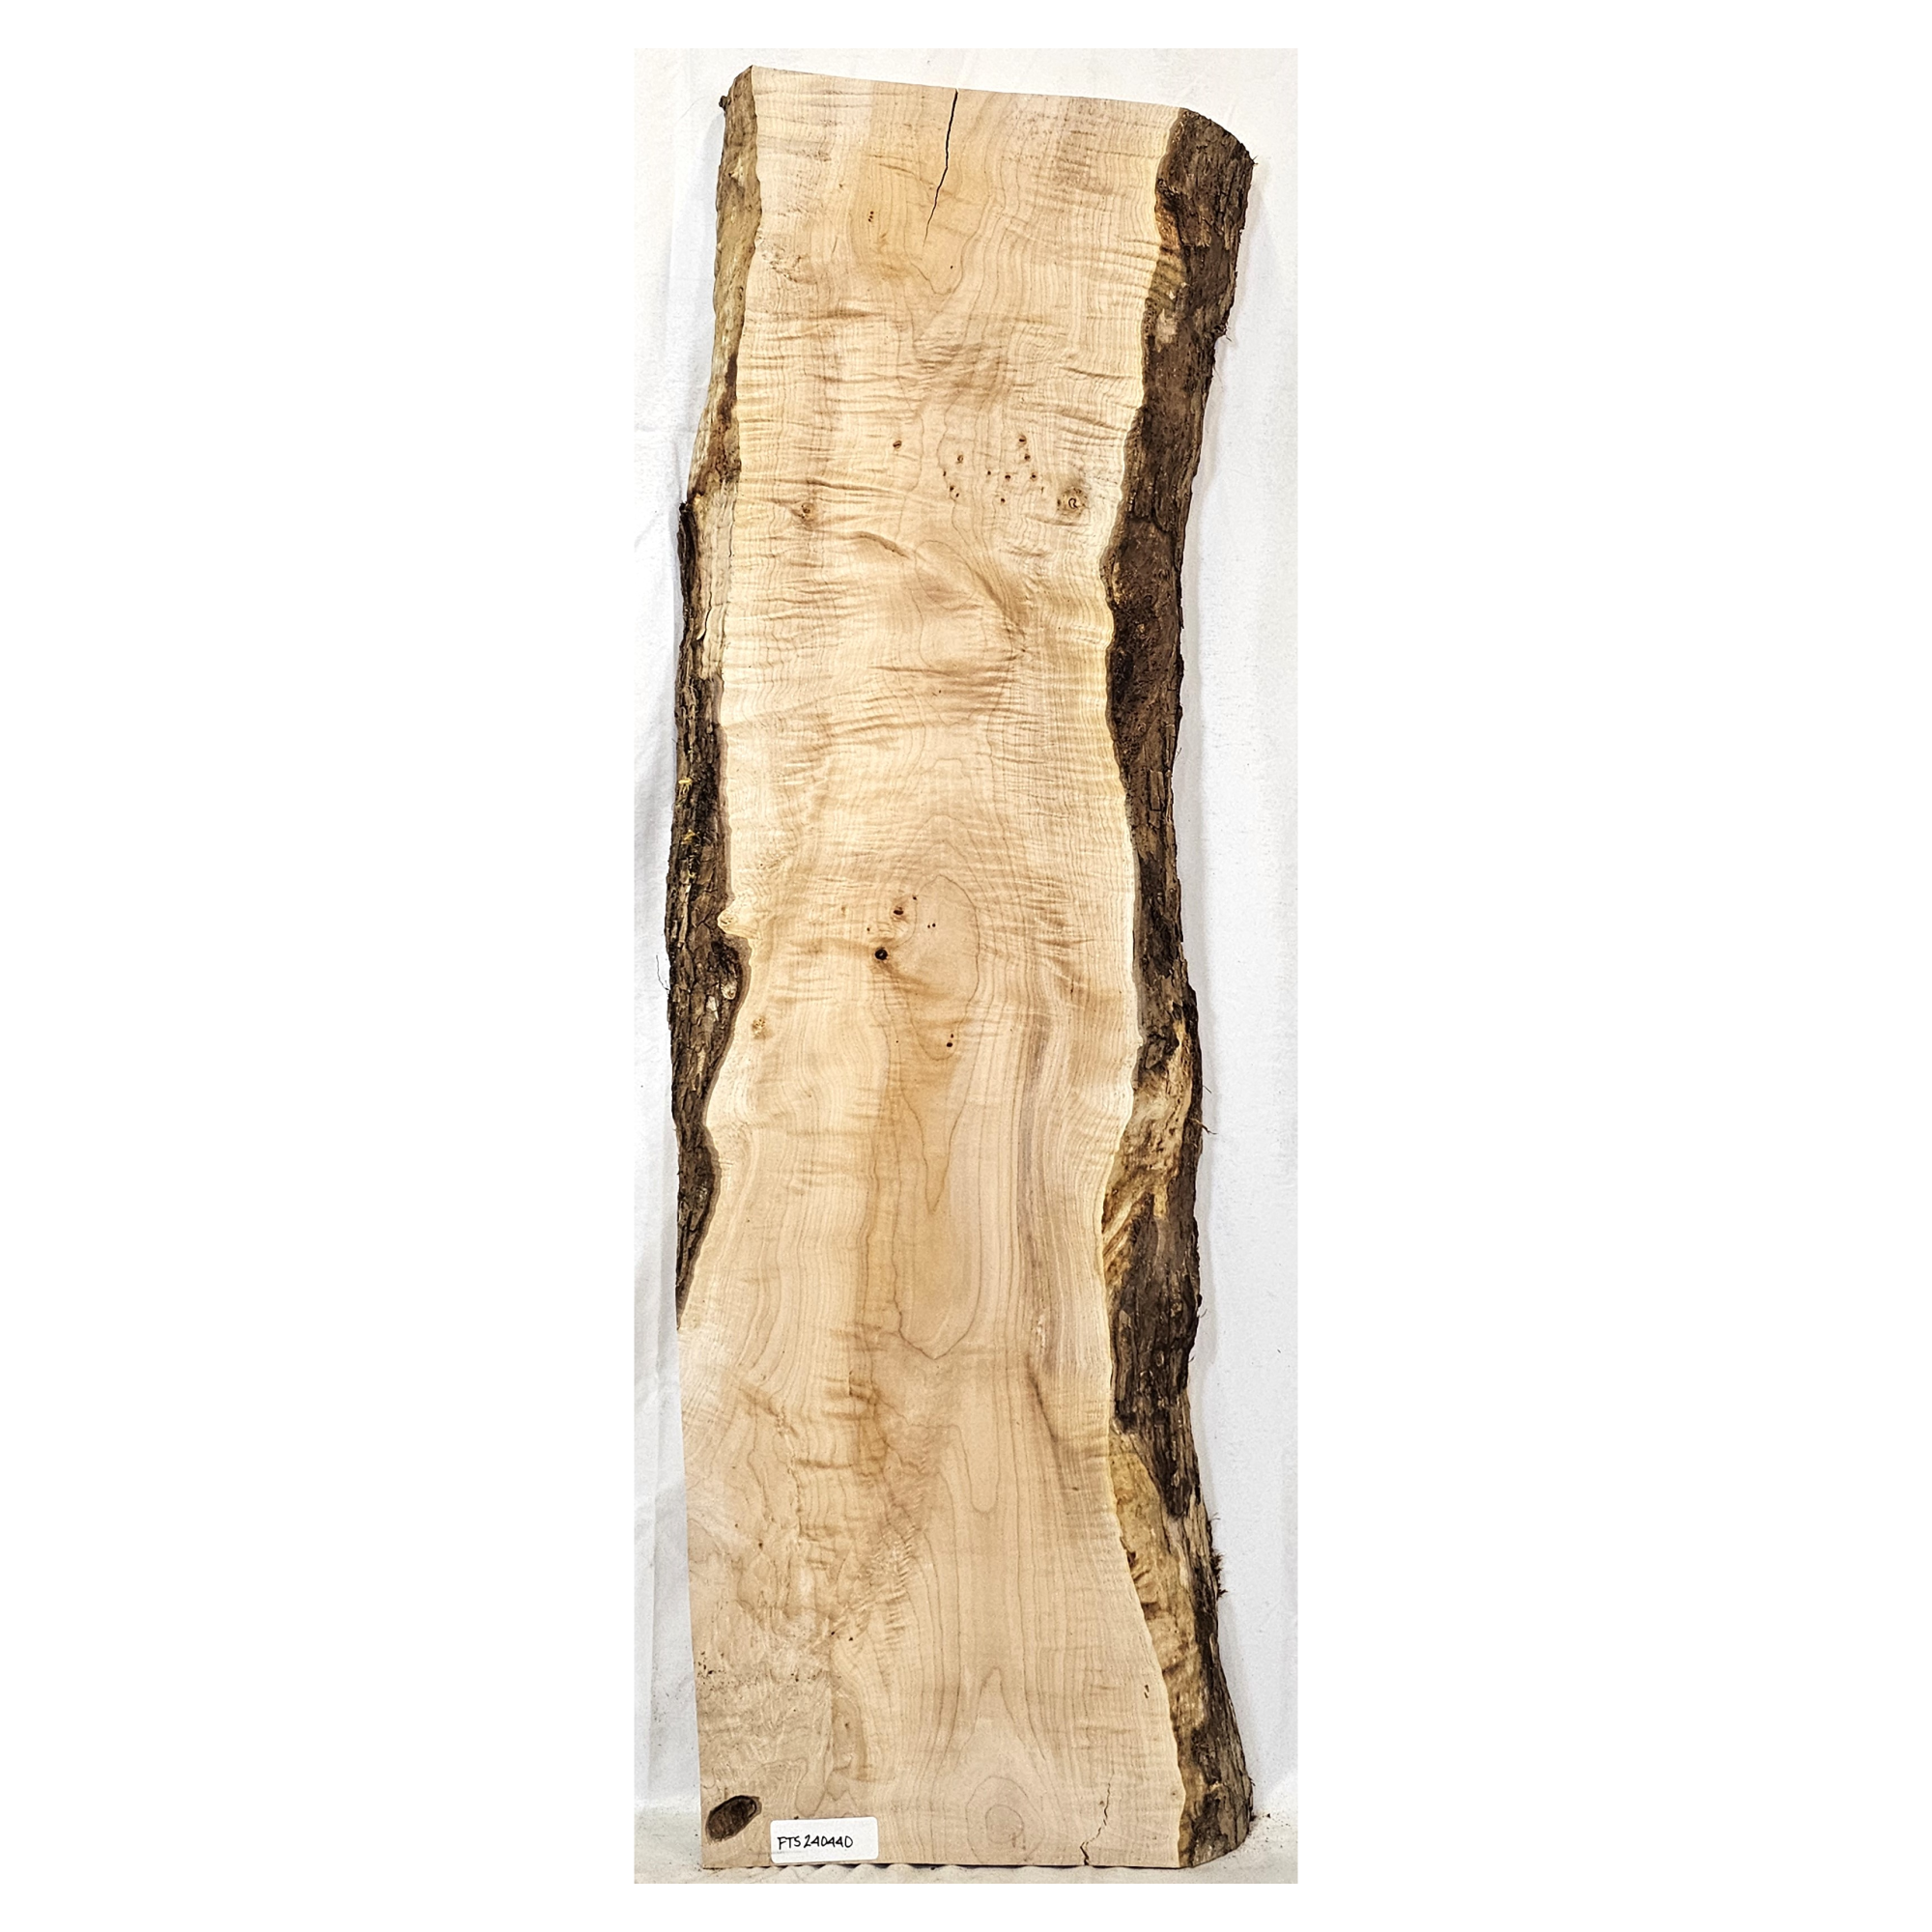 Flame (curly) maple slab with 4A grade flat-sawn figure, light two-tone color, bark seam and live edges.  This piece has end checks.